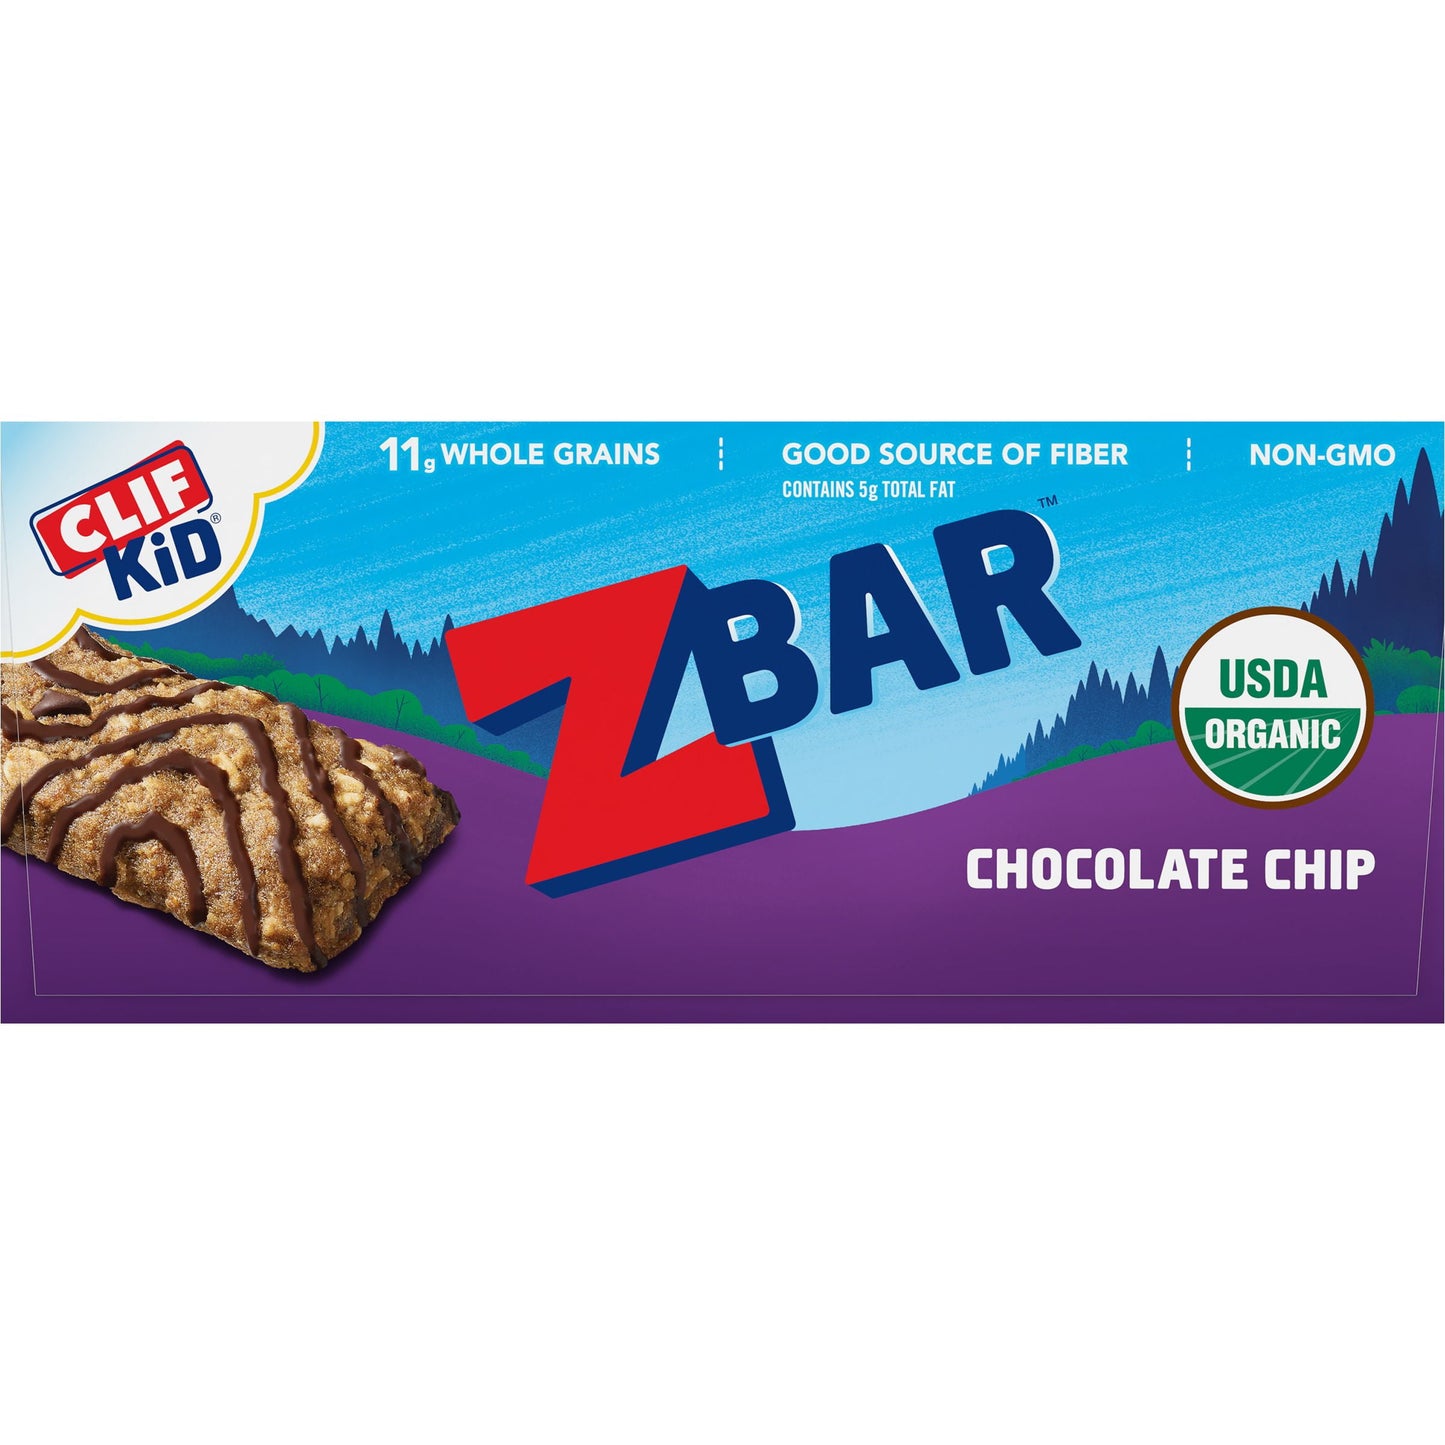 - Chocolate Chip - Baked Whole Grain Snack Bars - USDA Organic - 1.27 Oz. (18 Pack)